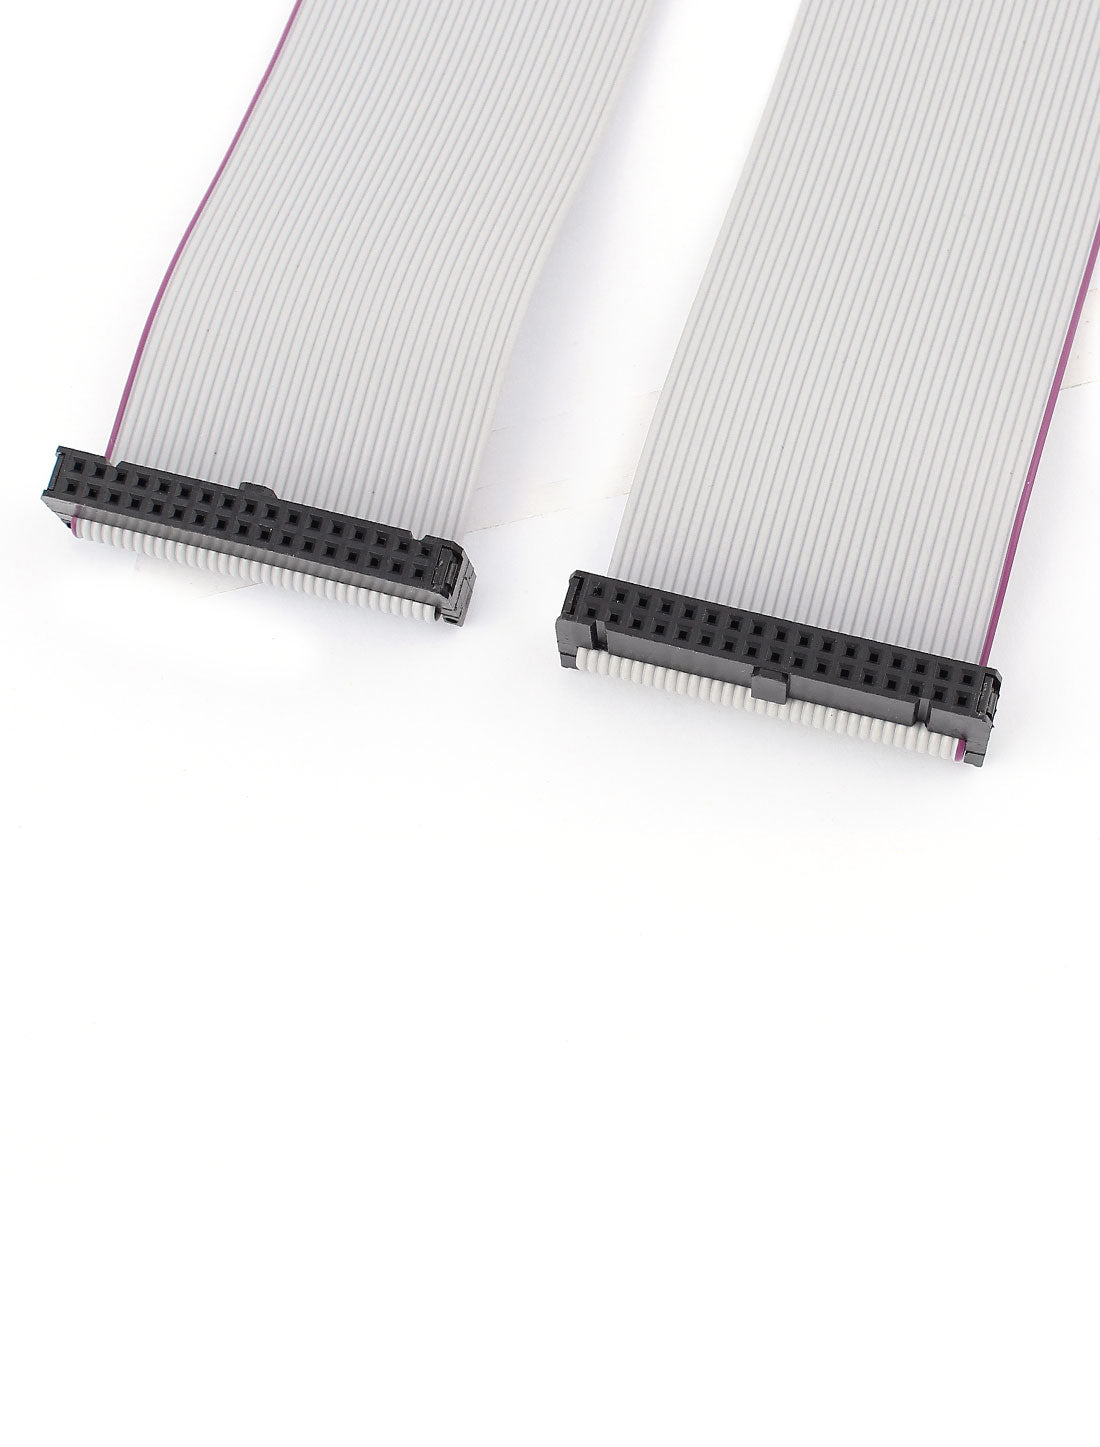 uxcell Uxcell 2.54mm Pitch 34 Pin F/F Connector IDC Flat Ribbon Cable 148cm Length